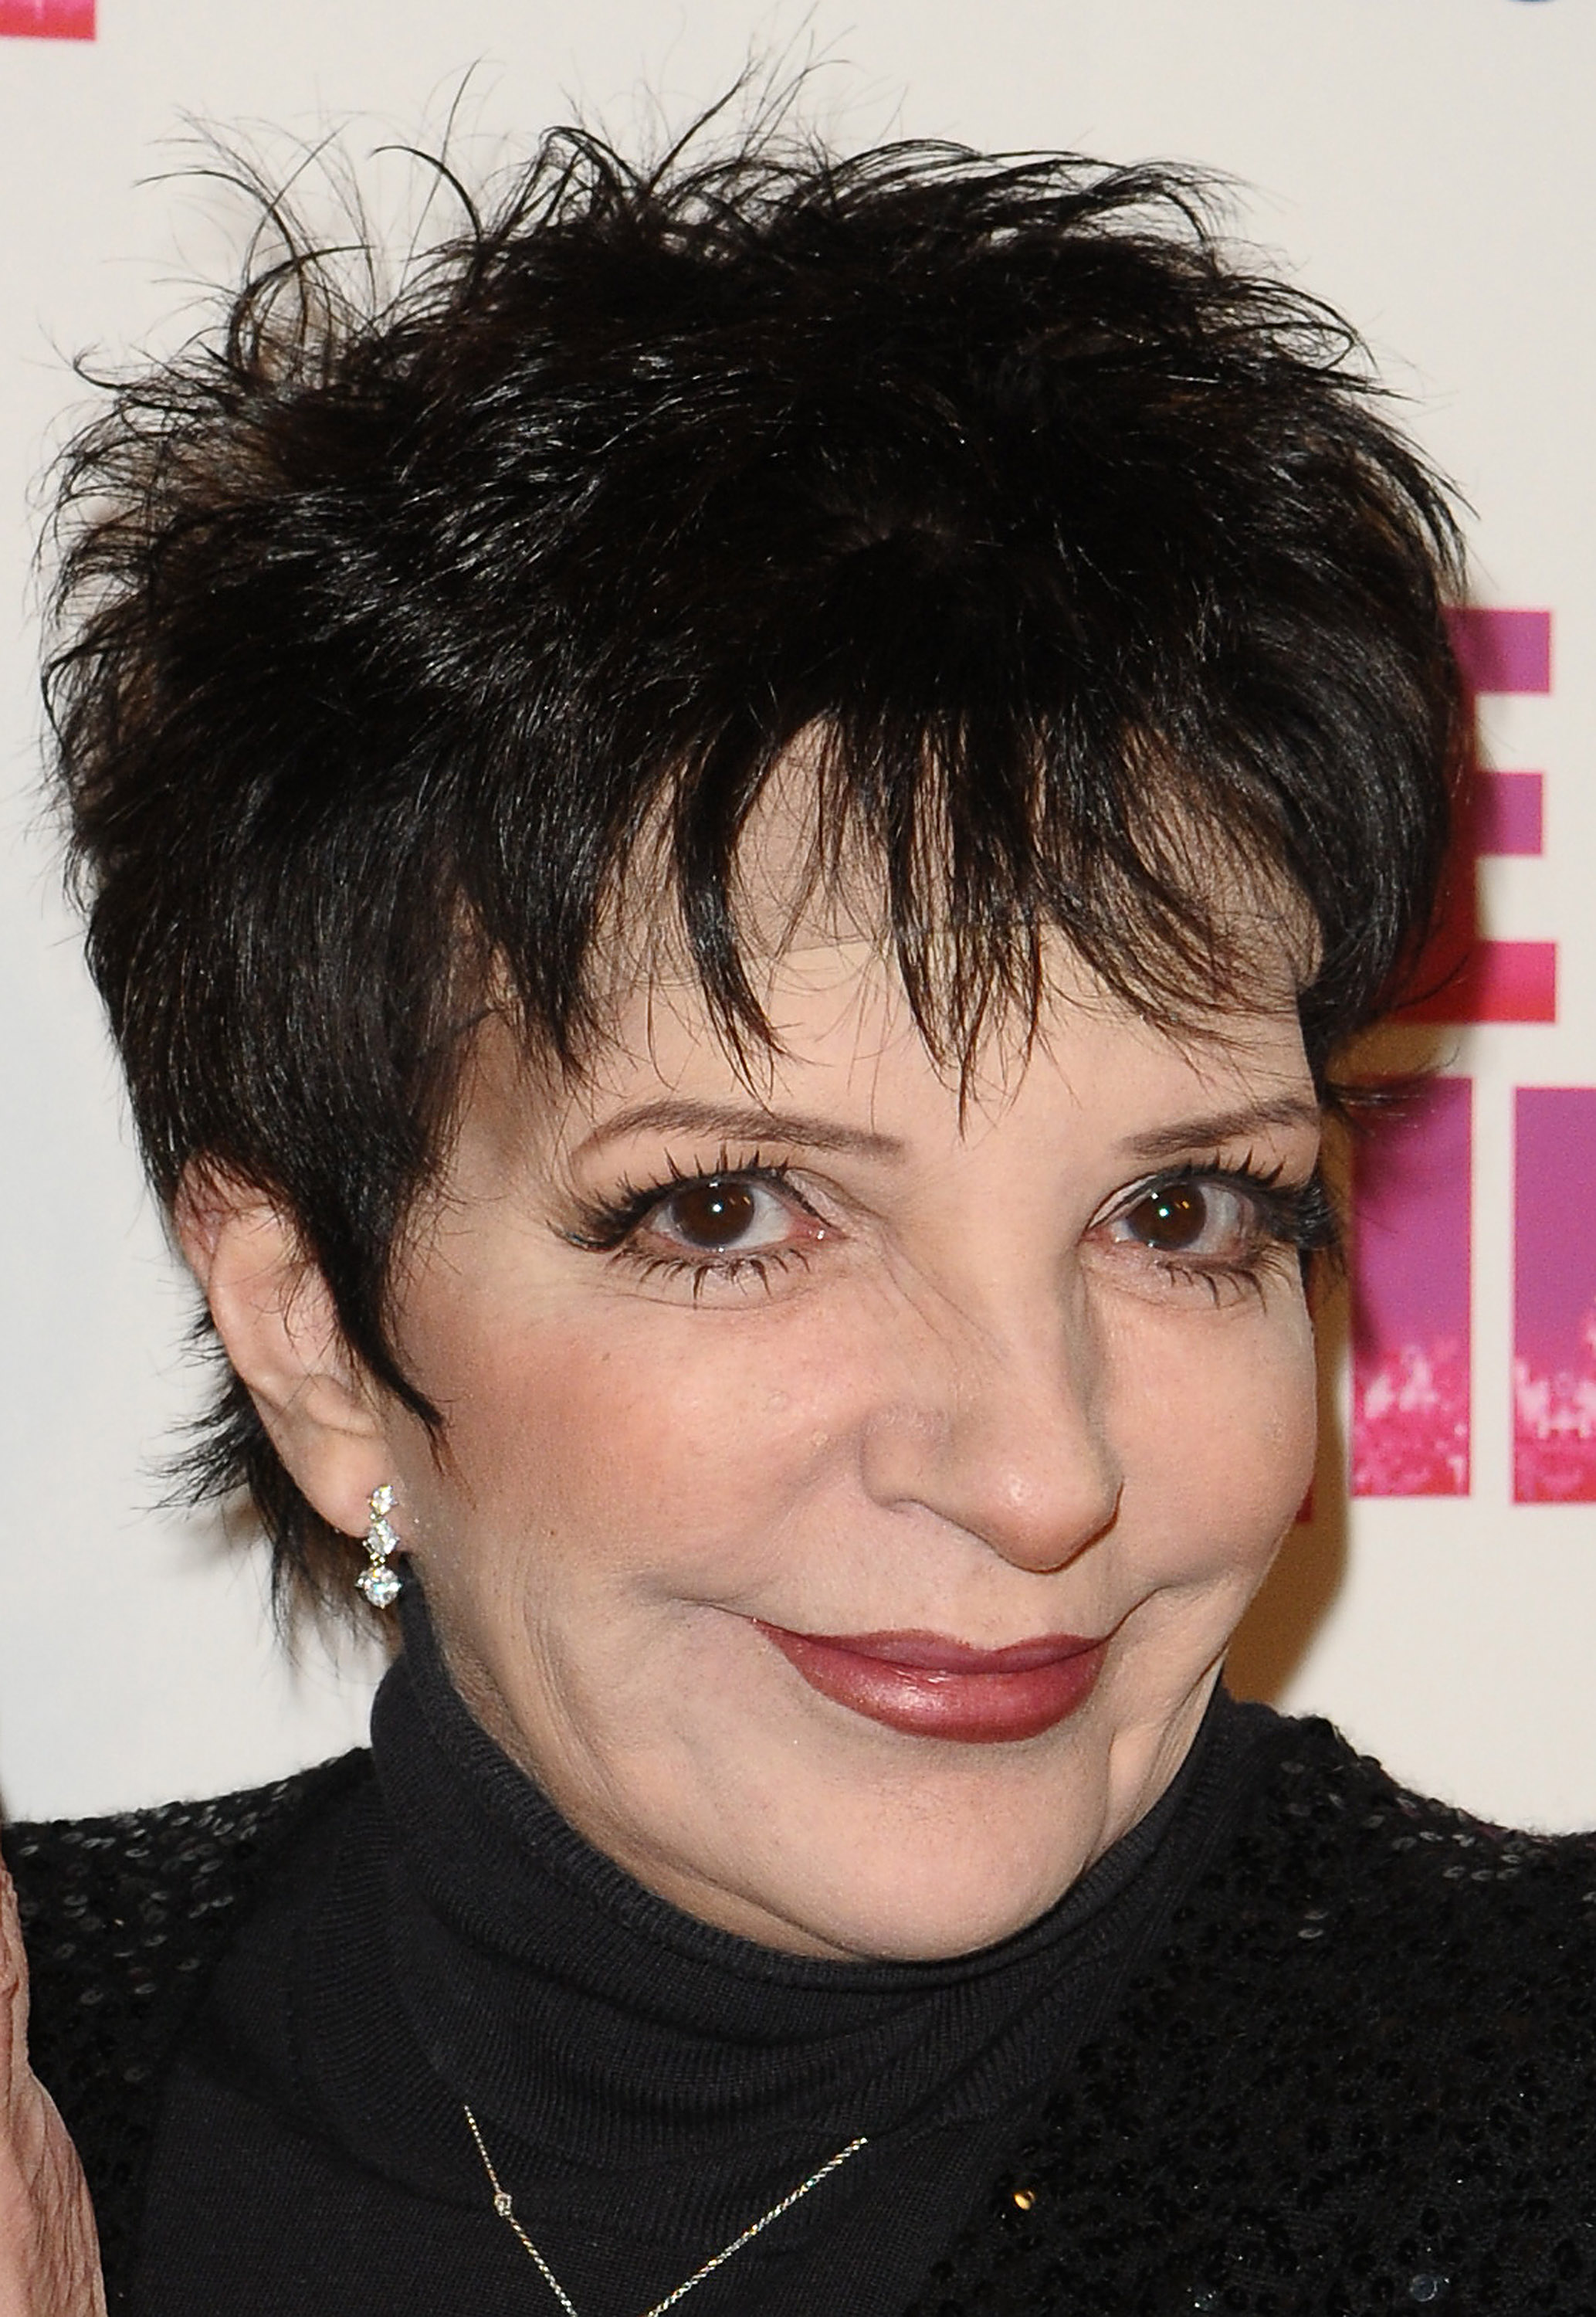 Liza Minnelli attends Perez Hilton's "Carn-Evil" Theatrical Freak and Funk 32nd birthday party at Paramount Studios on March 27, 2010, in Los Angeles, California. | Source: Getty Images